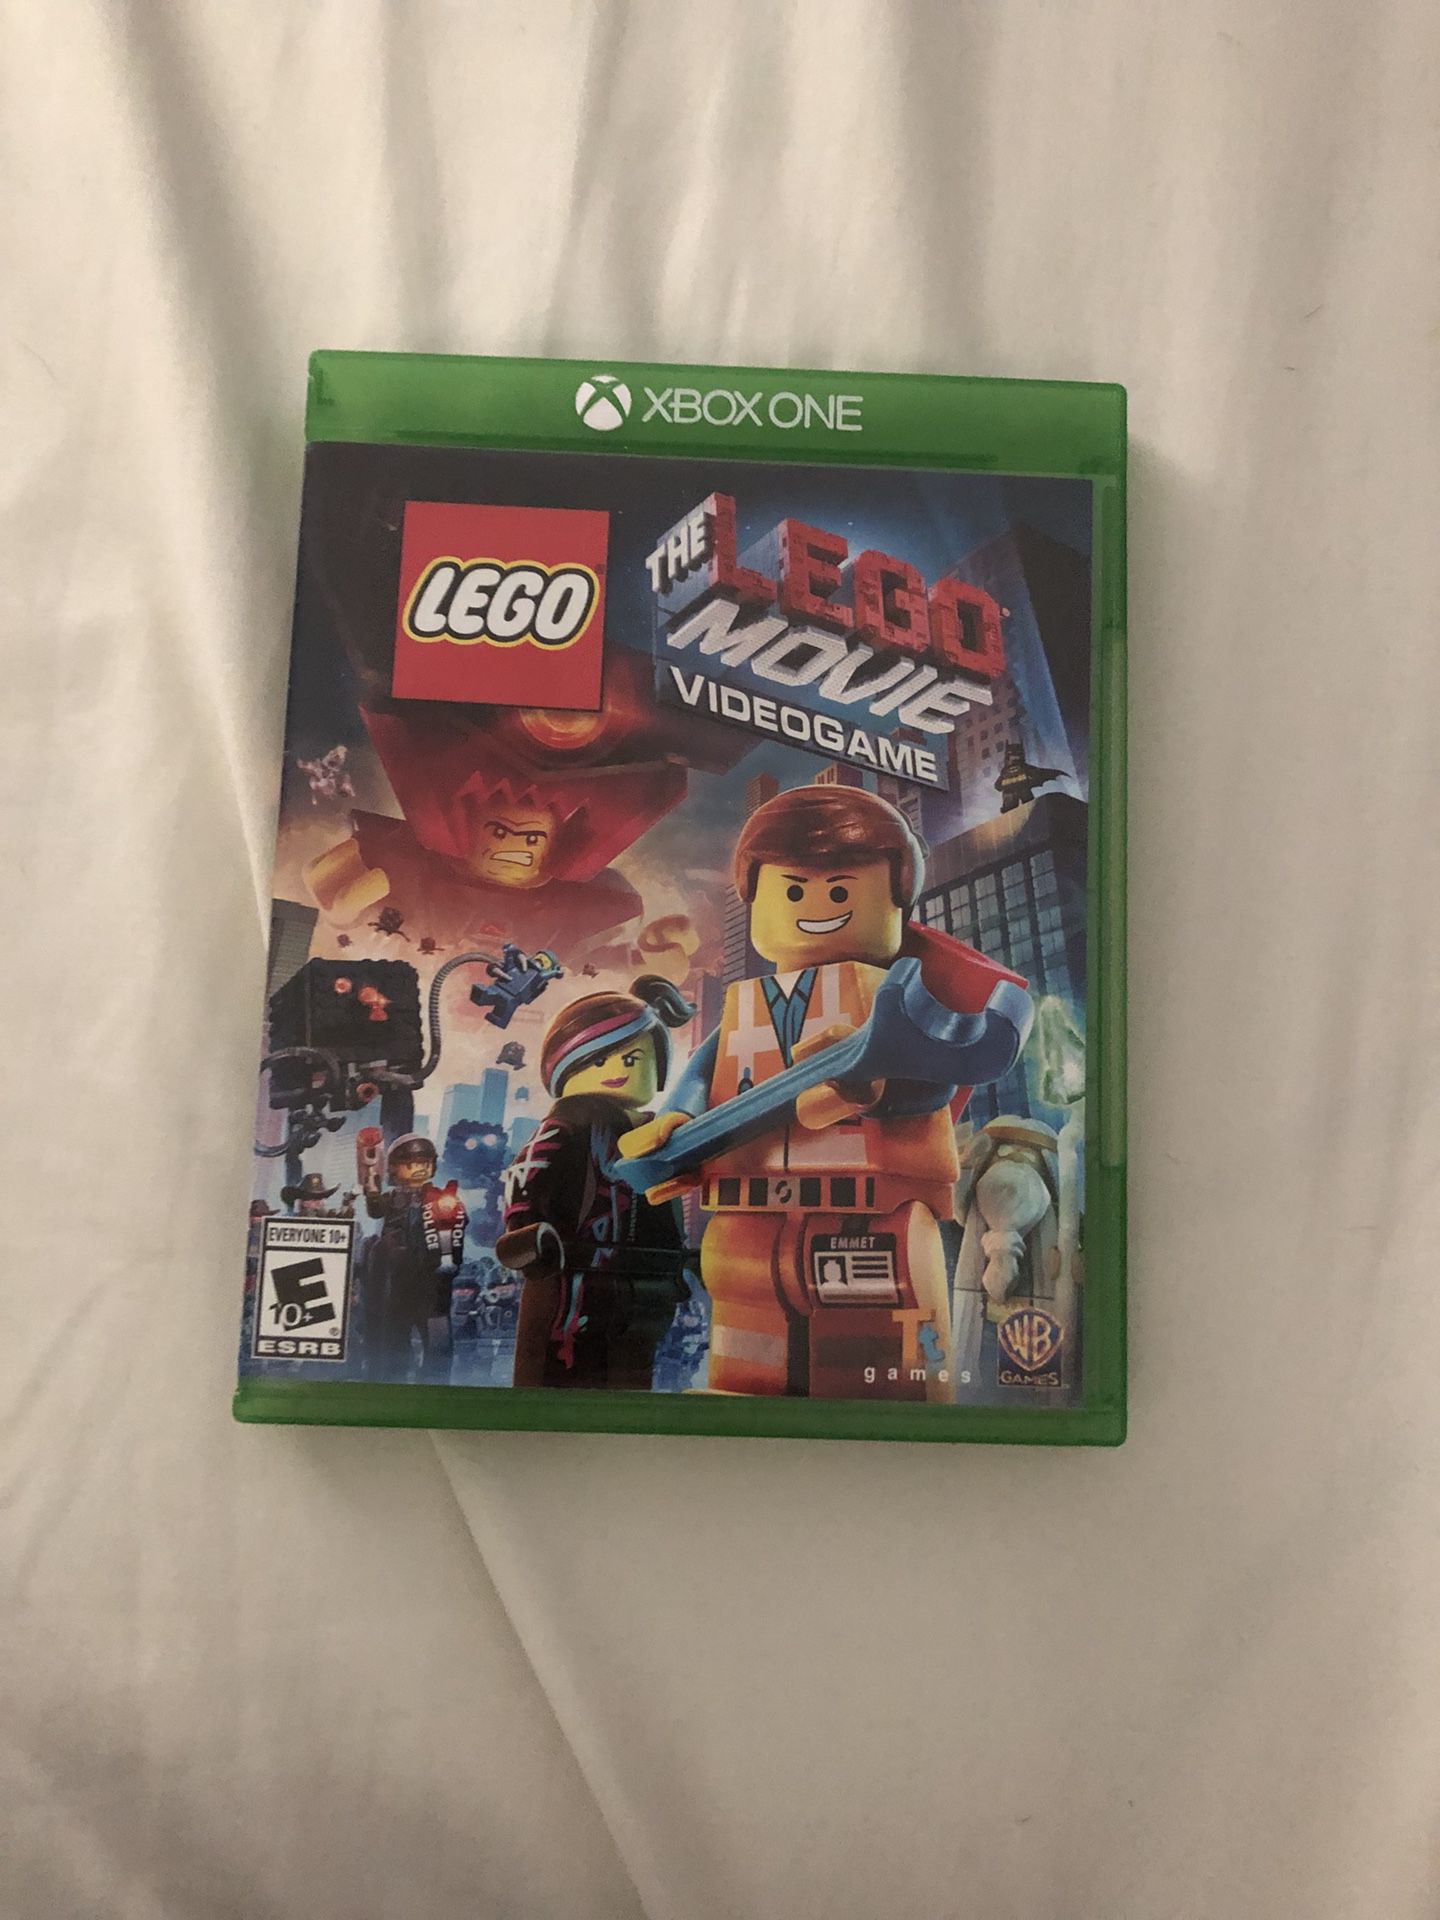 LEGO the movie video game